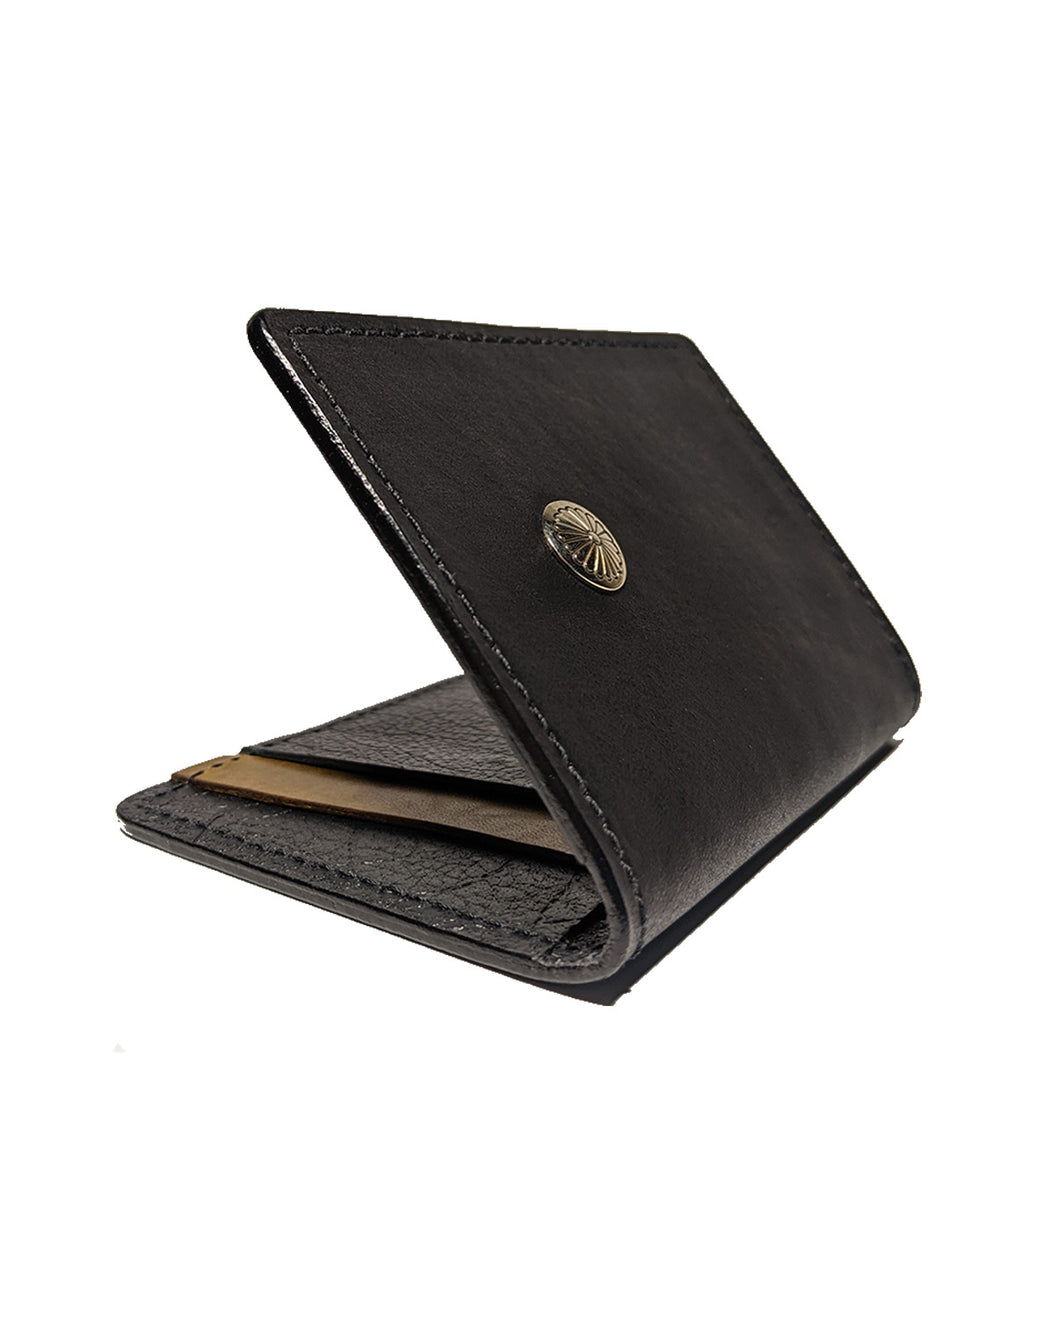 Shibizhi Wallet, Part of the Diné Bikéyah-Made Line. Full Grain Leather with Silver Button. Made in the Navajo Nation.